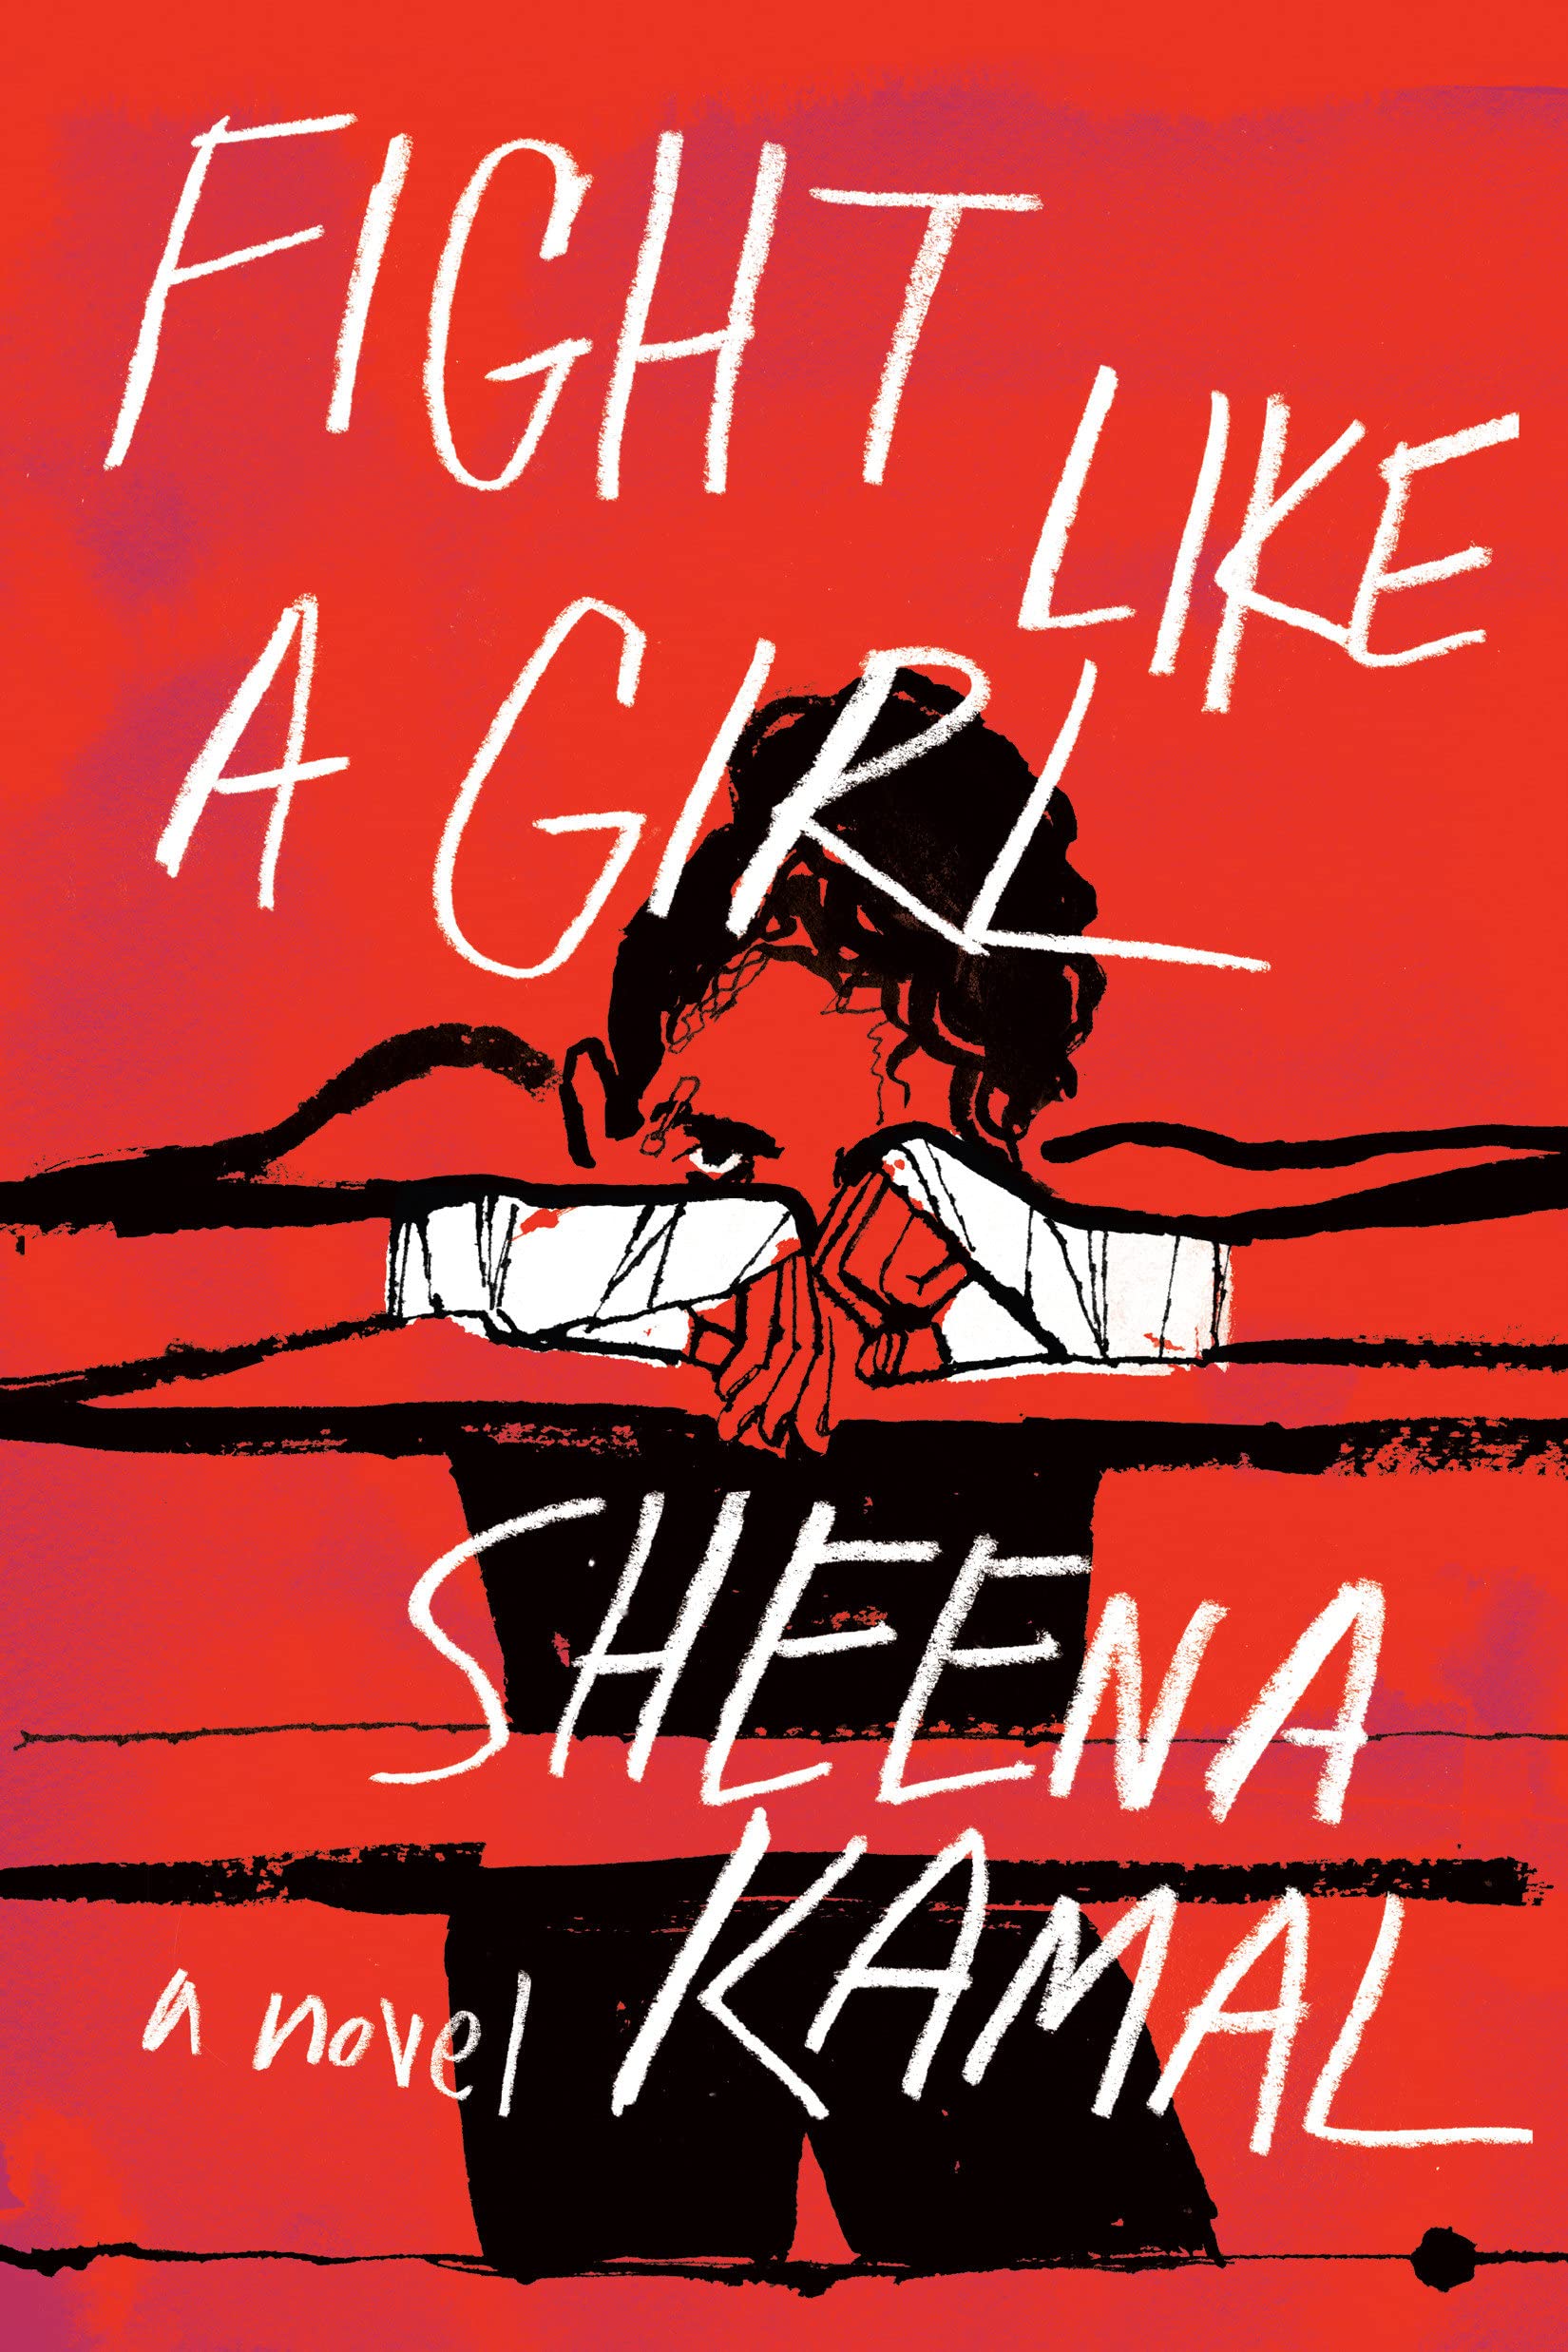 The book cover of Sheena Kamal's Fight Like A Girl